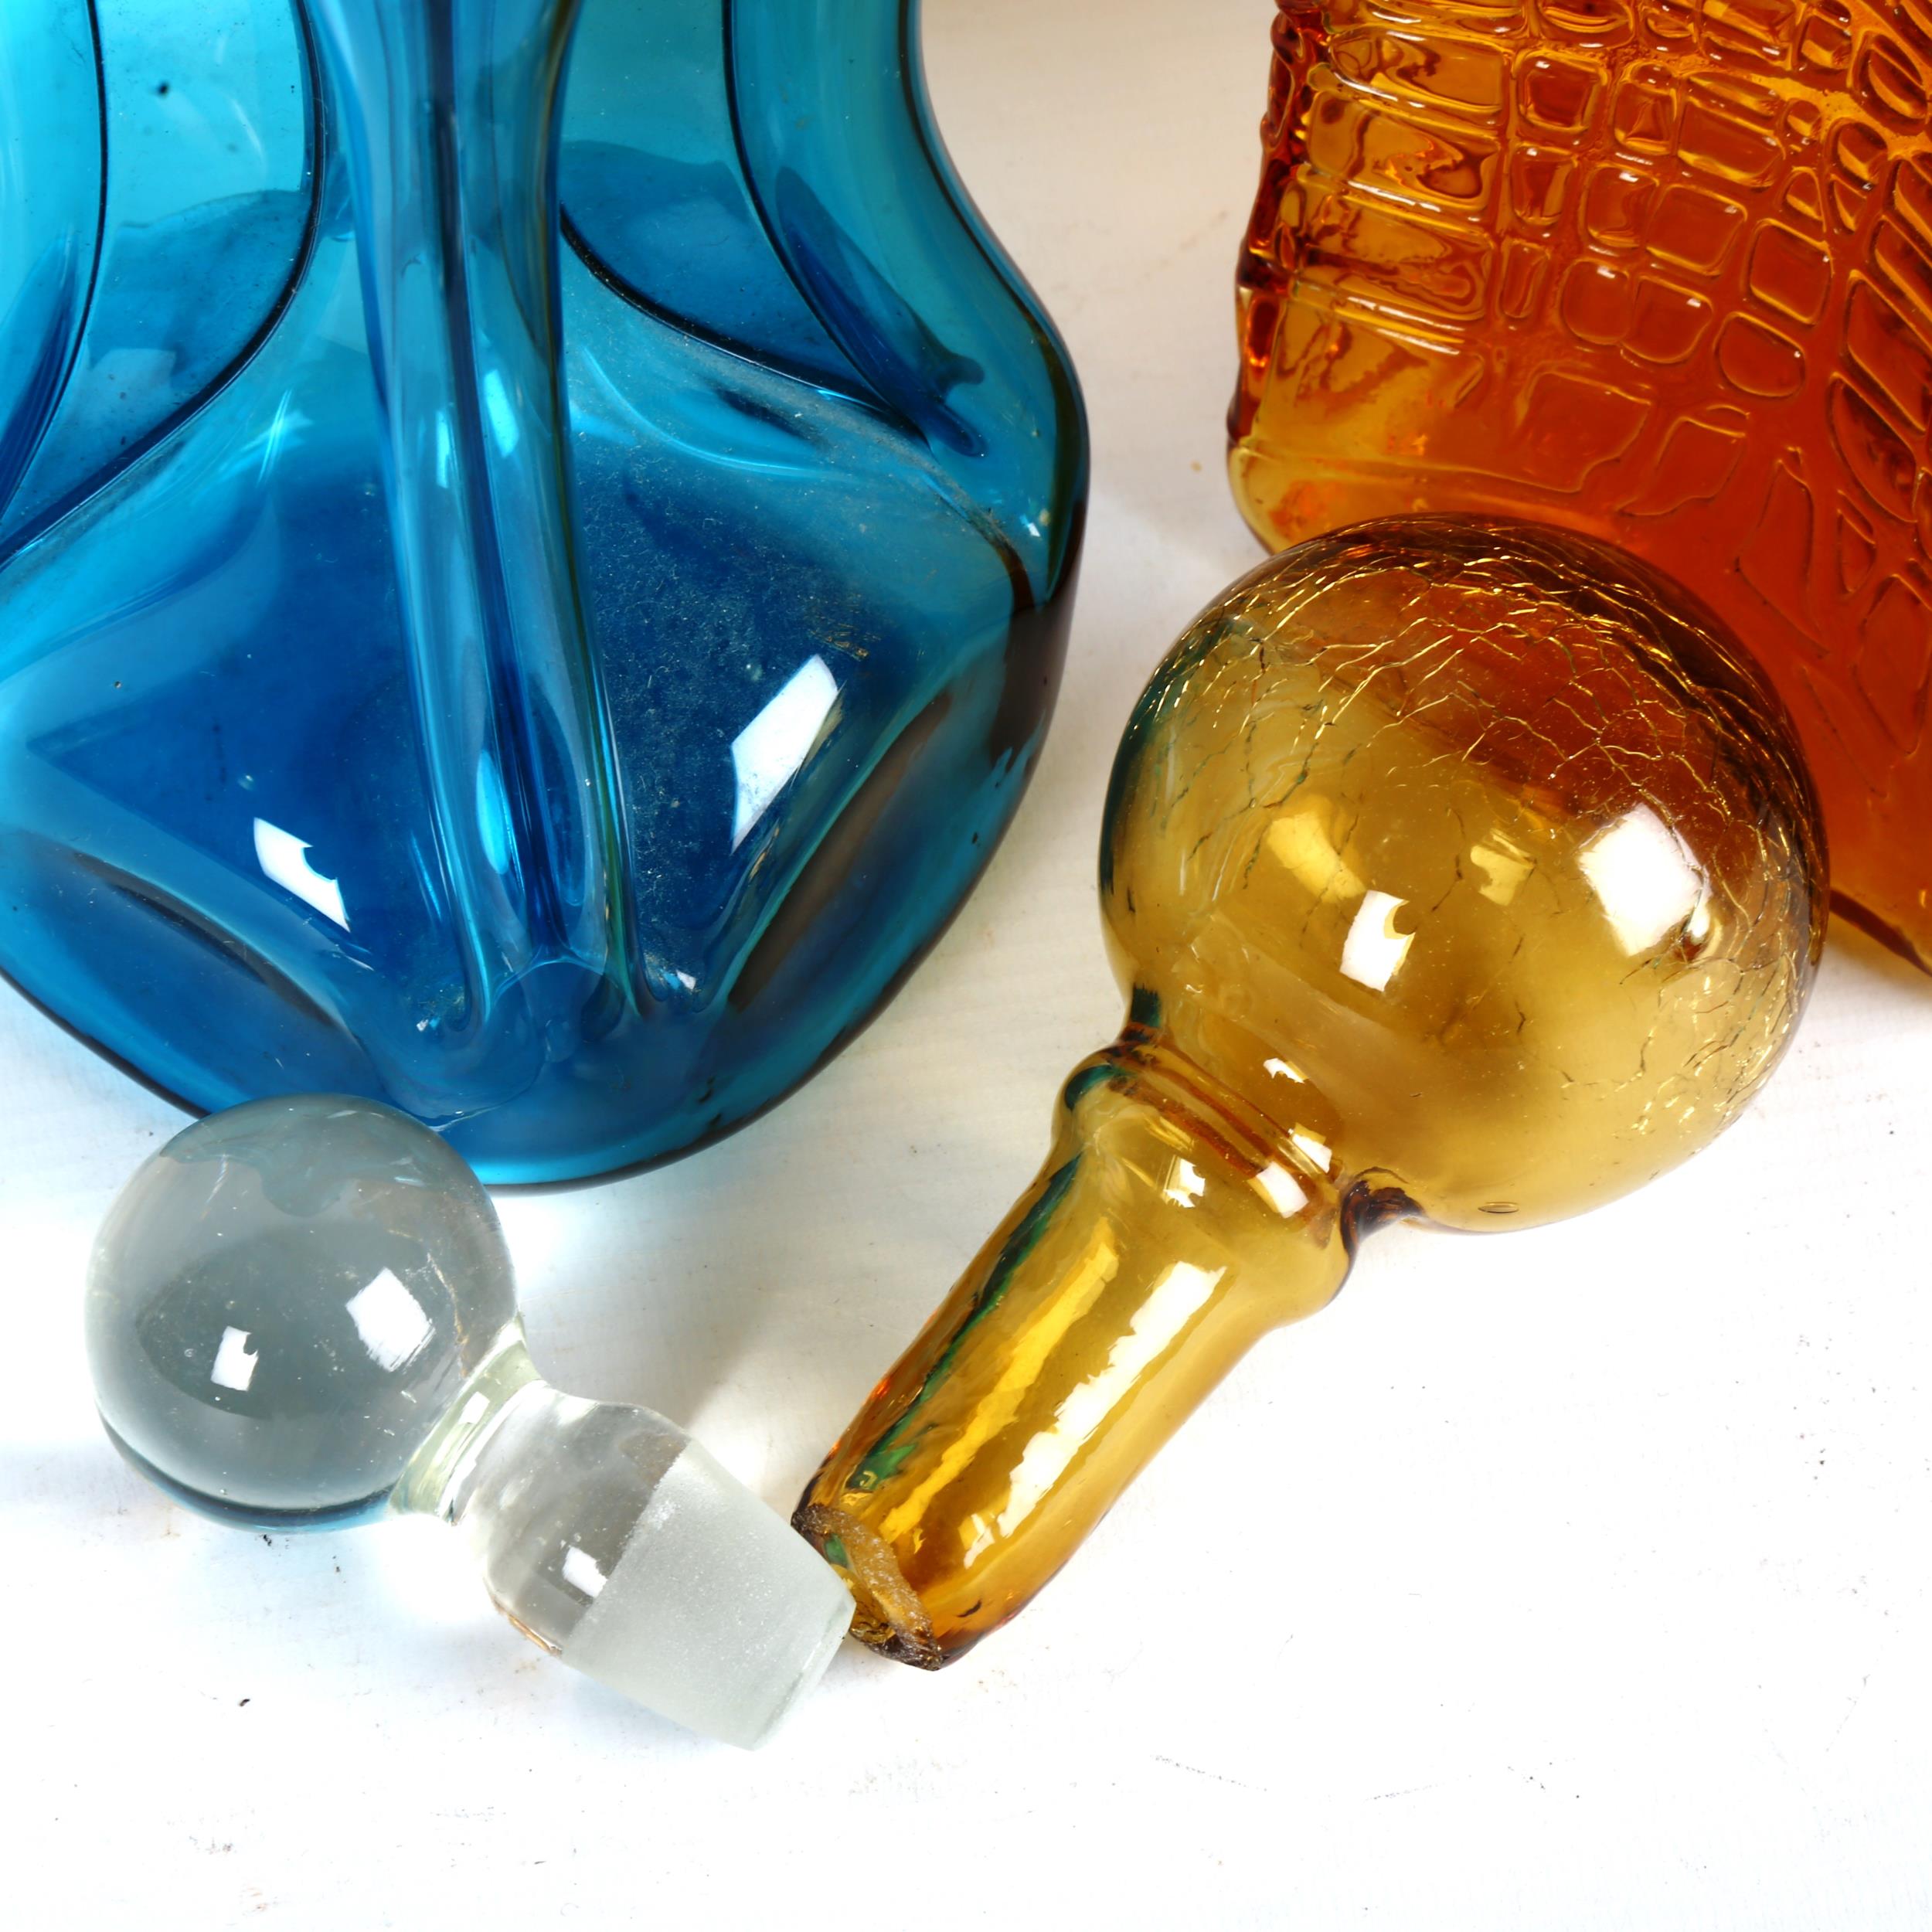 2 mid-century hand made decanters, blue glug glug and Amber decanter with makers label "Verrerie d' - Image 2 of 4